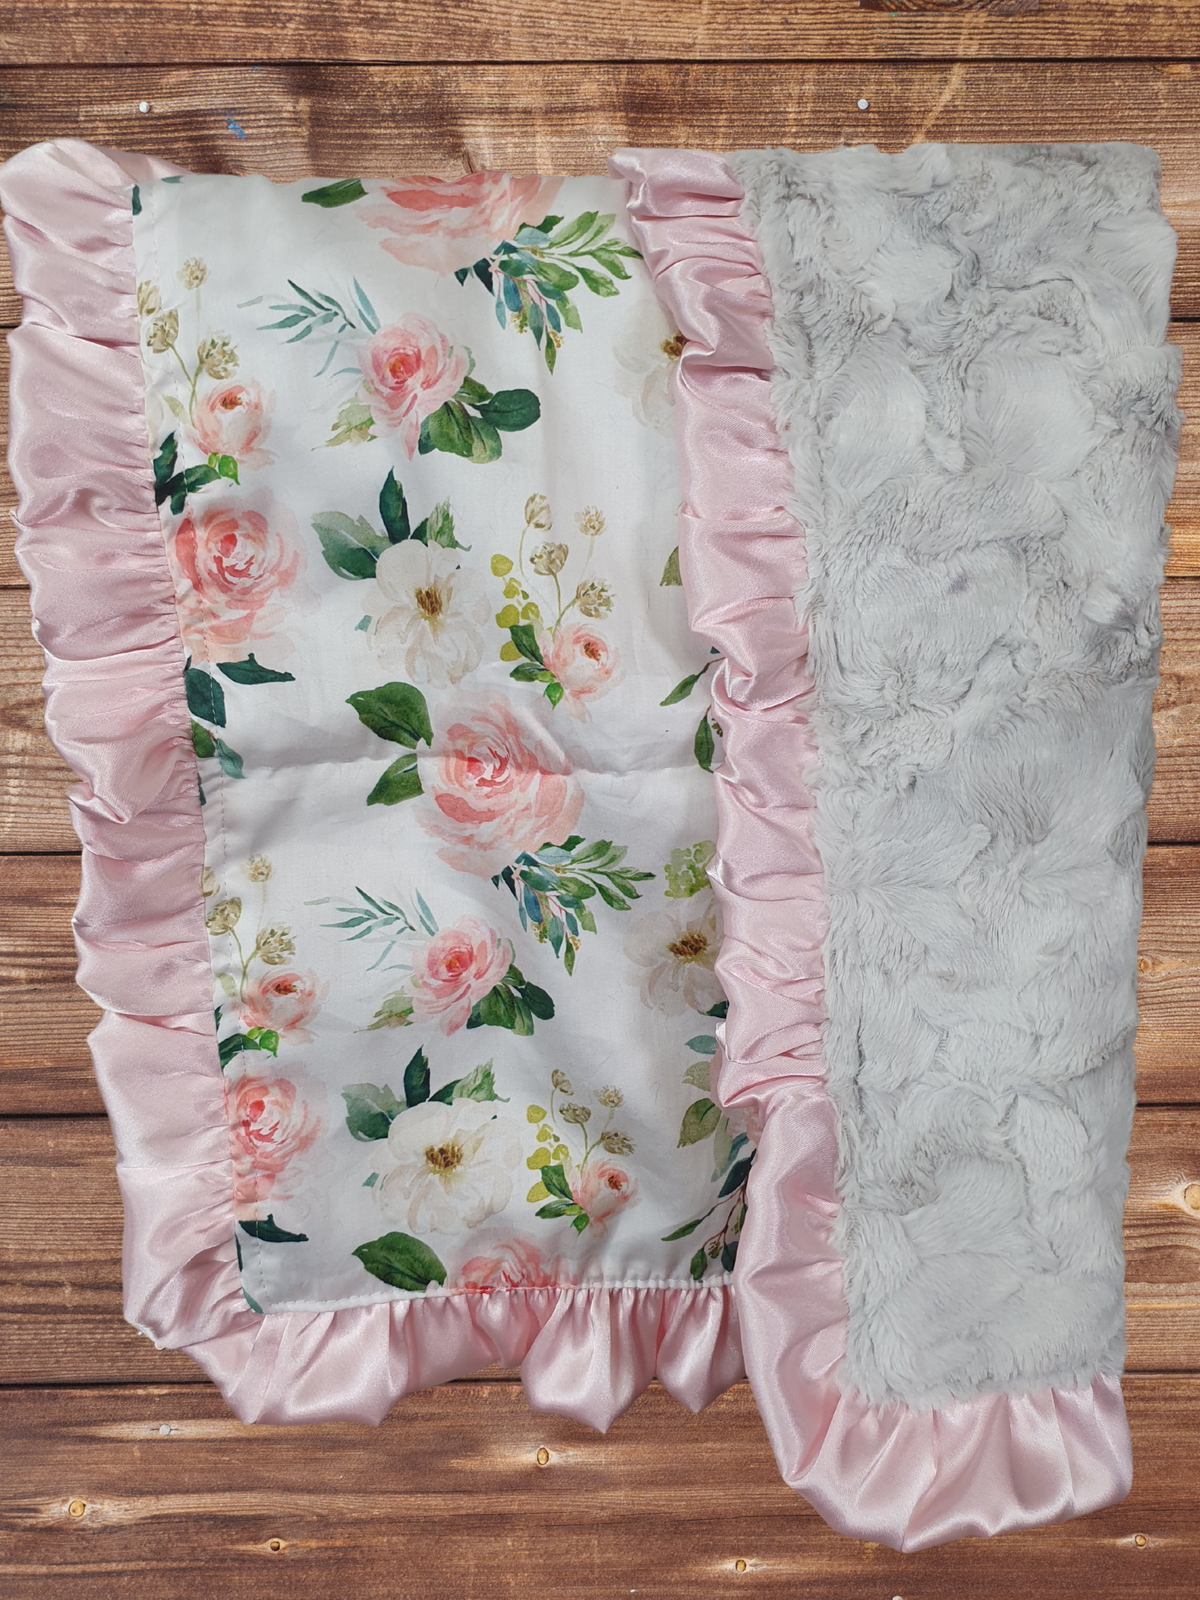 Ruffle Baby Lovey - Blush Floral Lovey - DBC Baby Bedding Co 